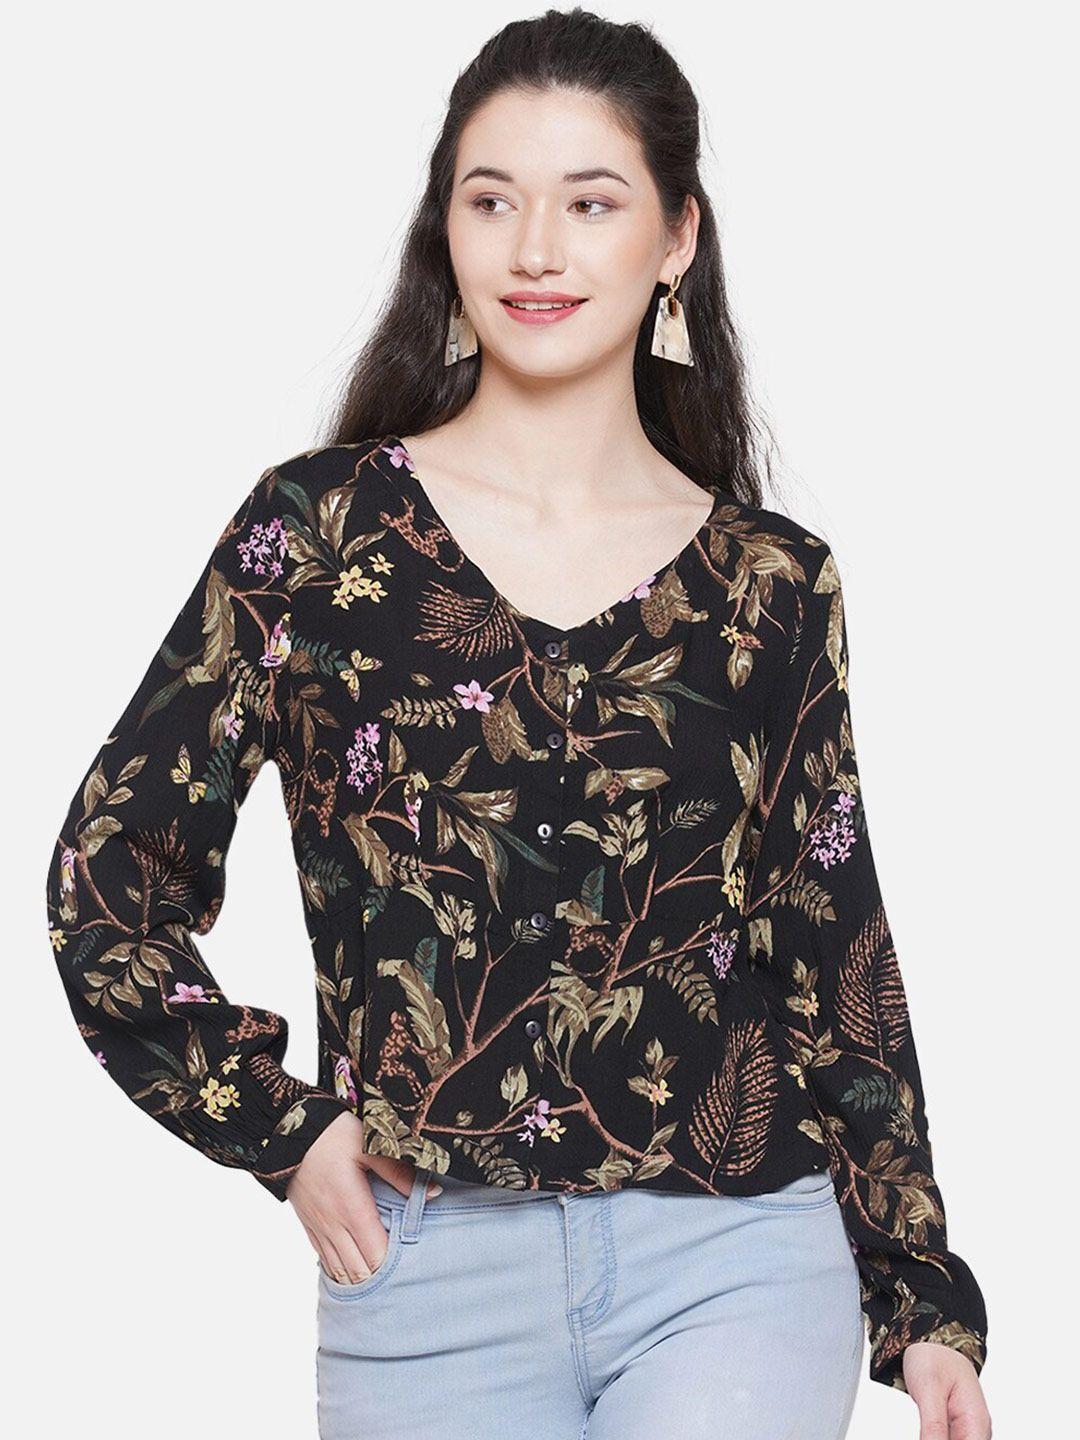 bellamia floral printed v-neck cuffed sleeves shirt style top